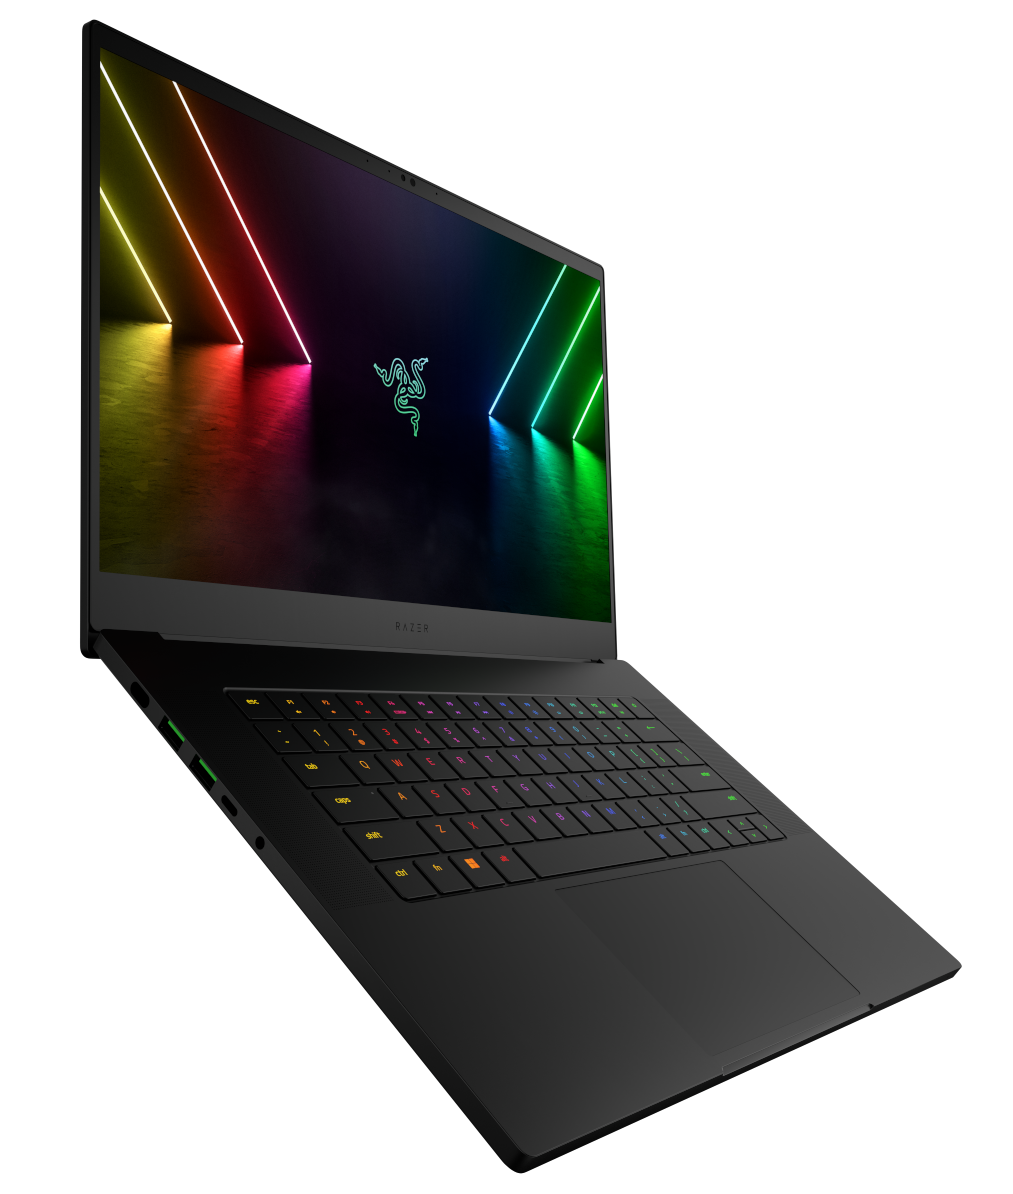 The Razer Blade 15 is powered by Intel Alder Lake processors and up to RTX 3080 Ti graphics with 105W of power. It comes in a few display configuration options, too.